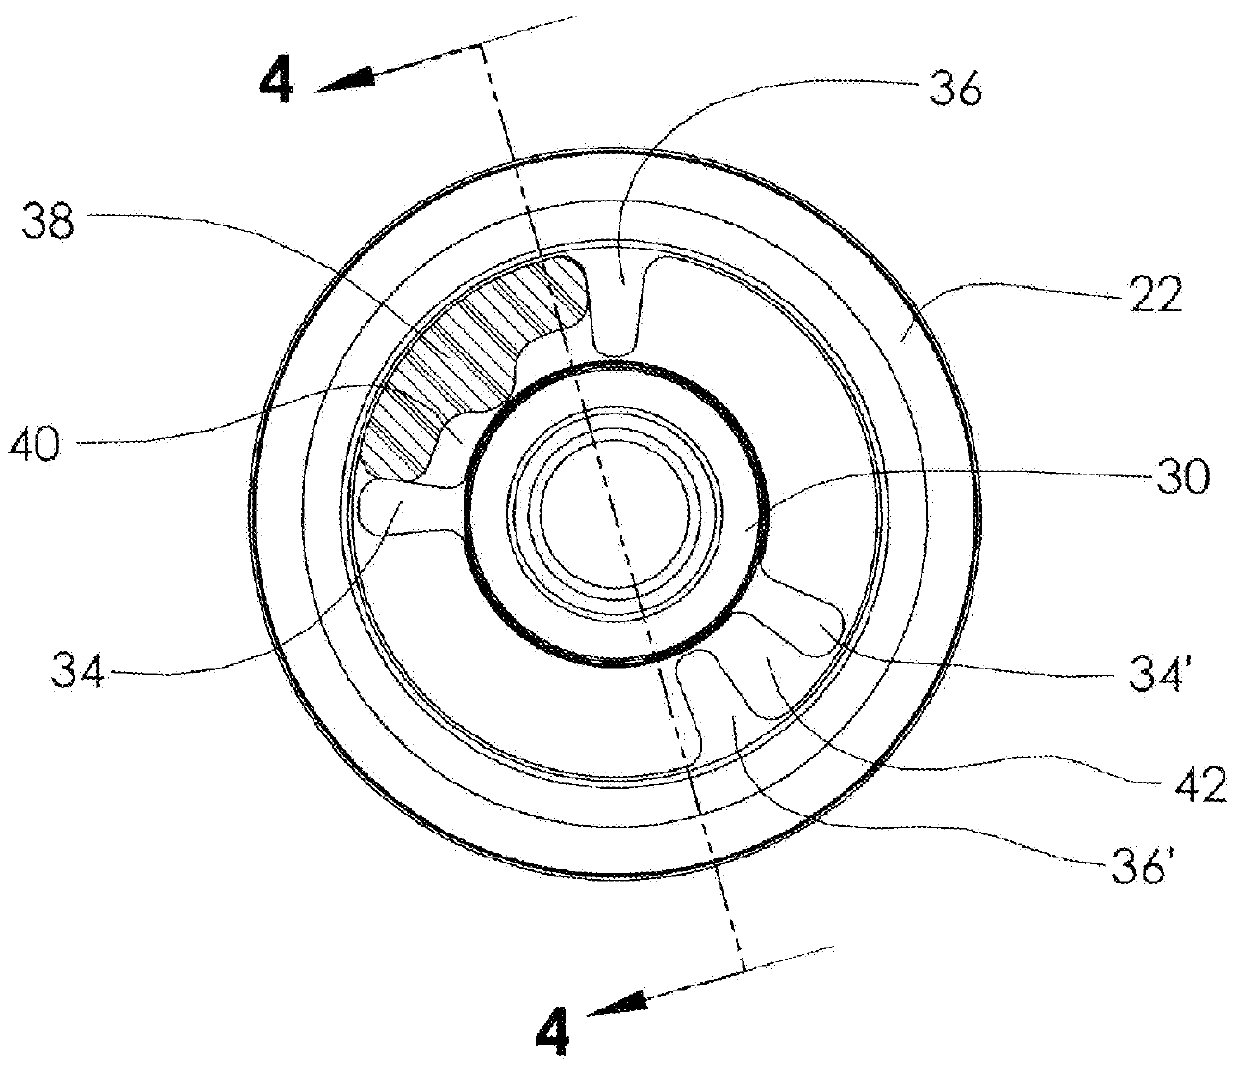 Elastomeric spring pulley assembly for rotary devices